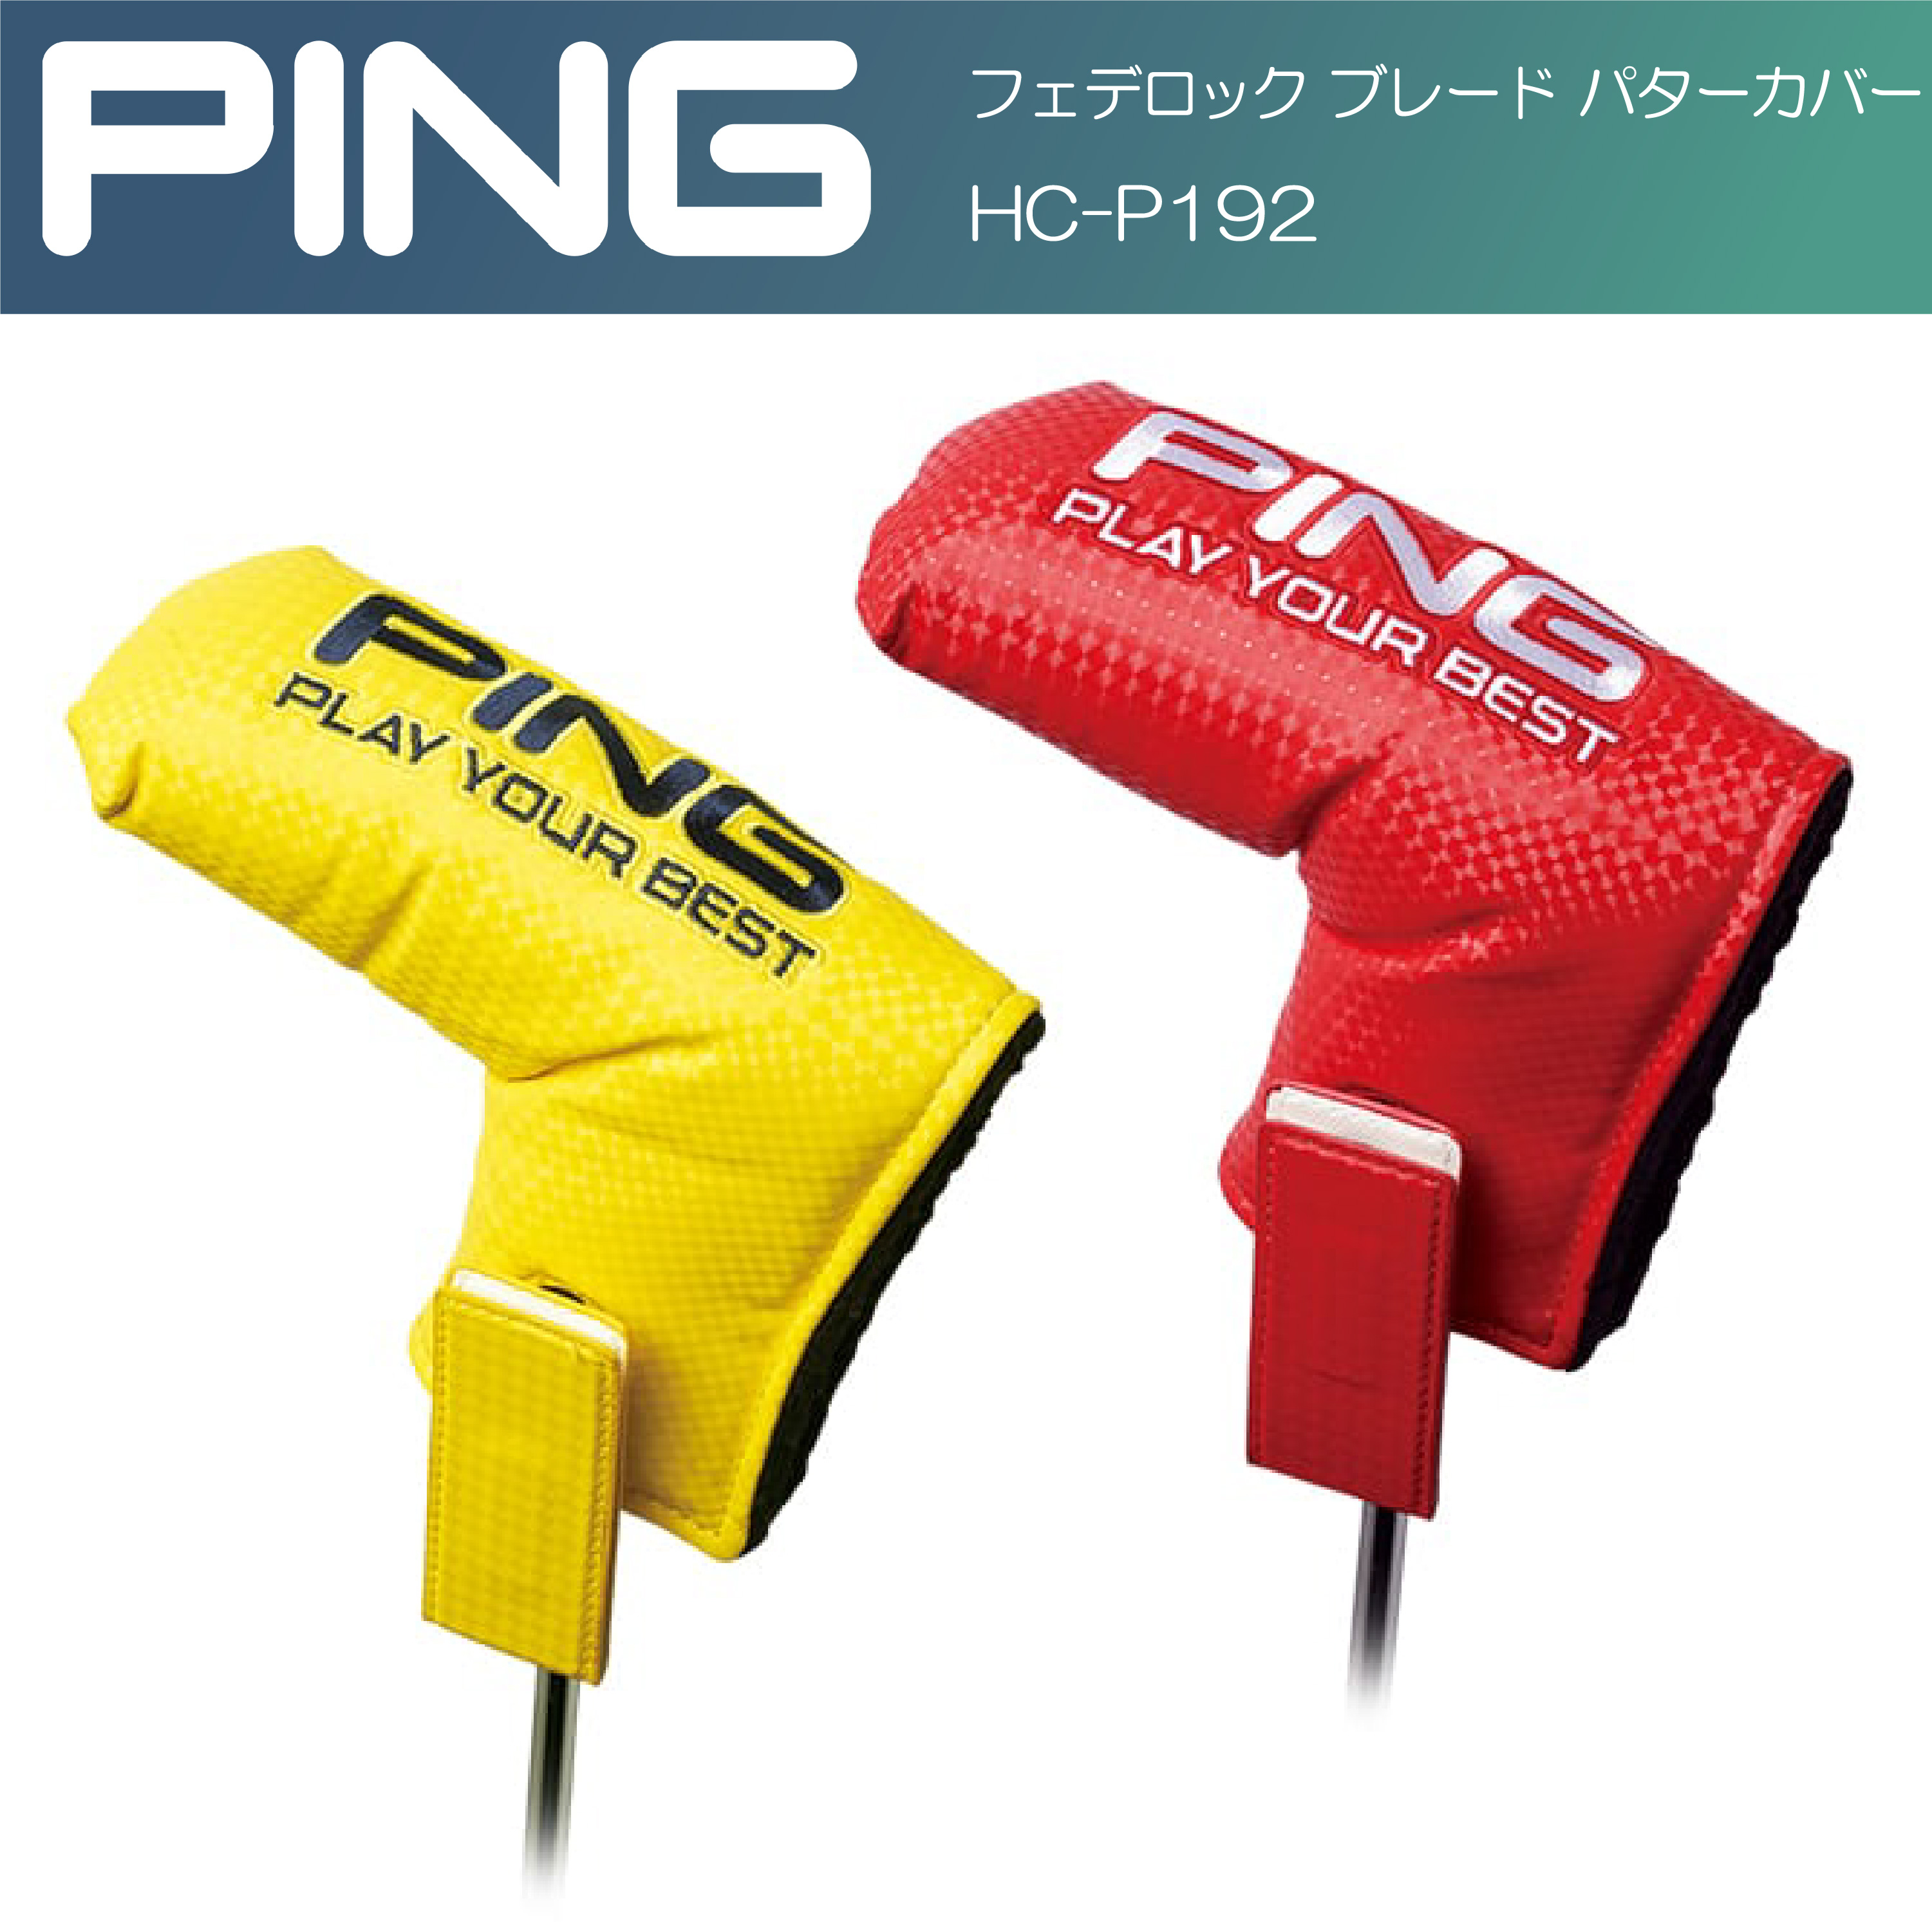 PING FIDLOCK BLADE PUTTER COVER HC-P192